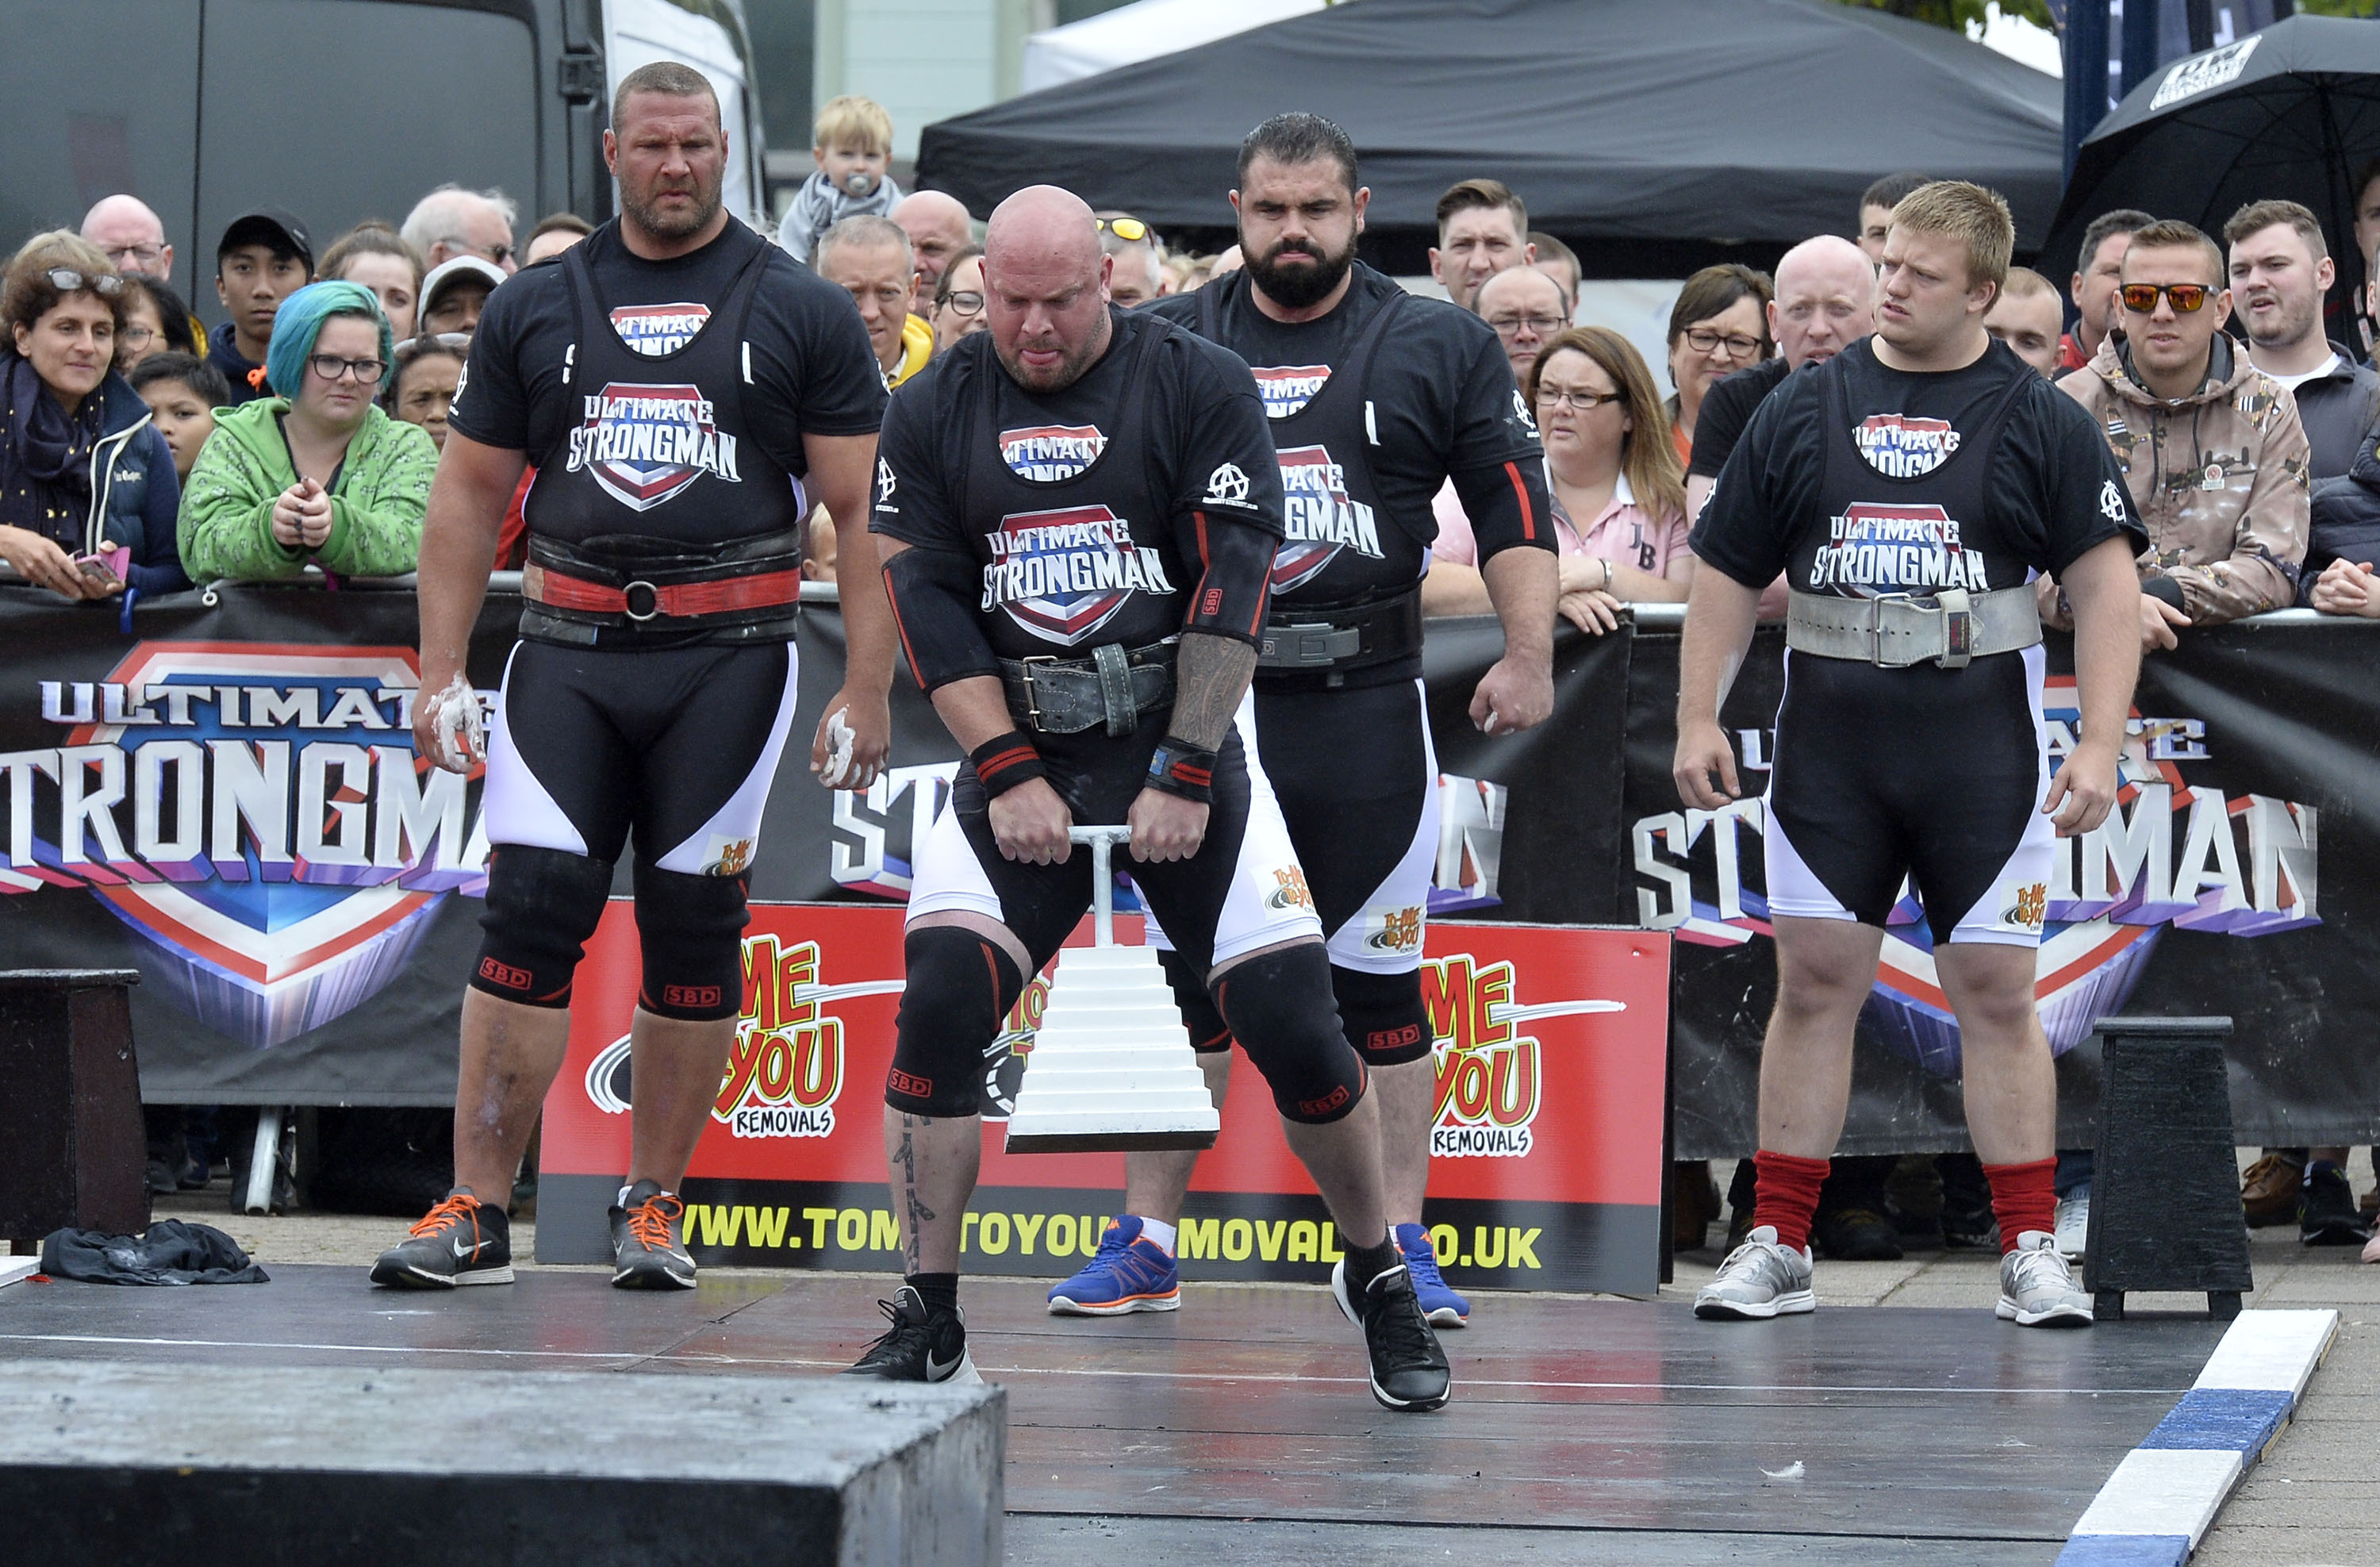 England's Strongest Man Phil Roberts gets England underway in the Farmers Walk Steeplechase.